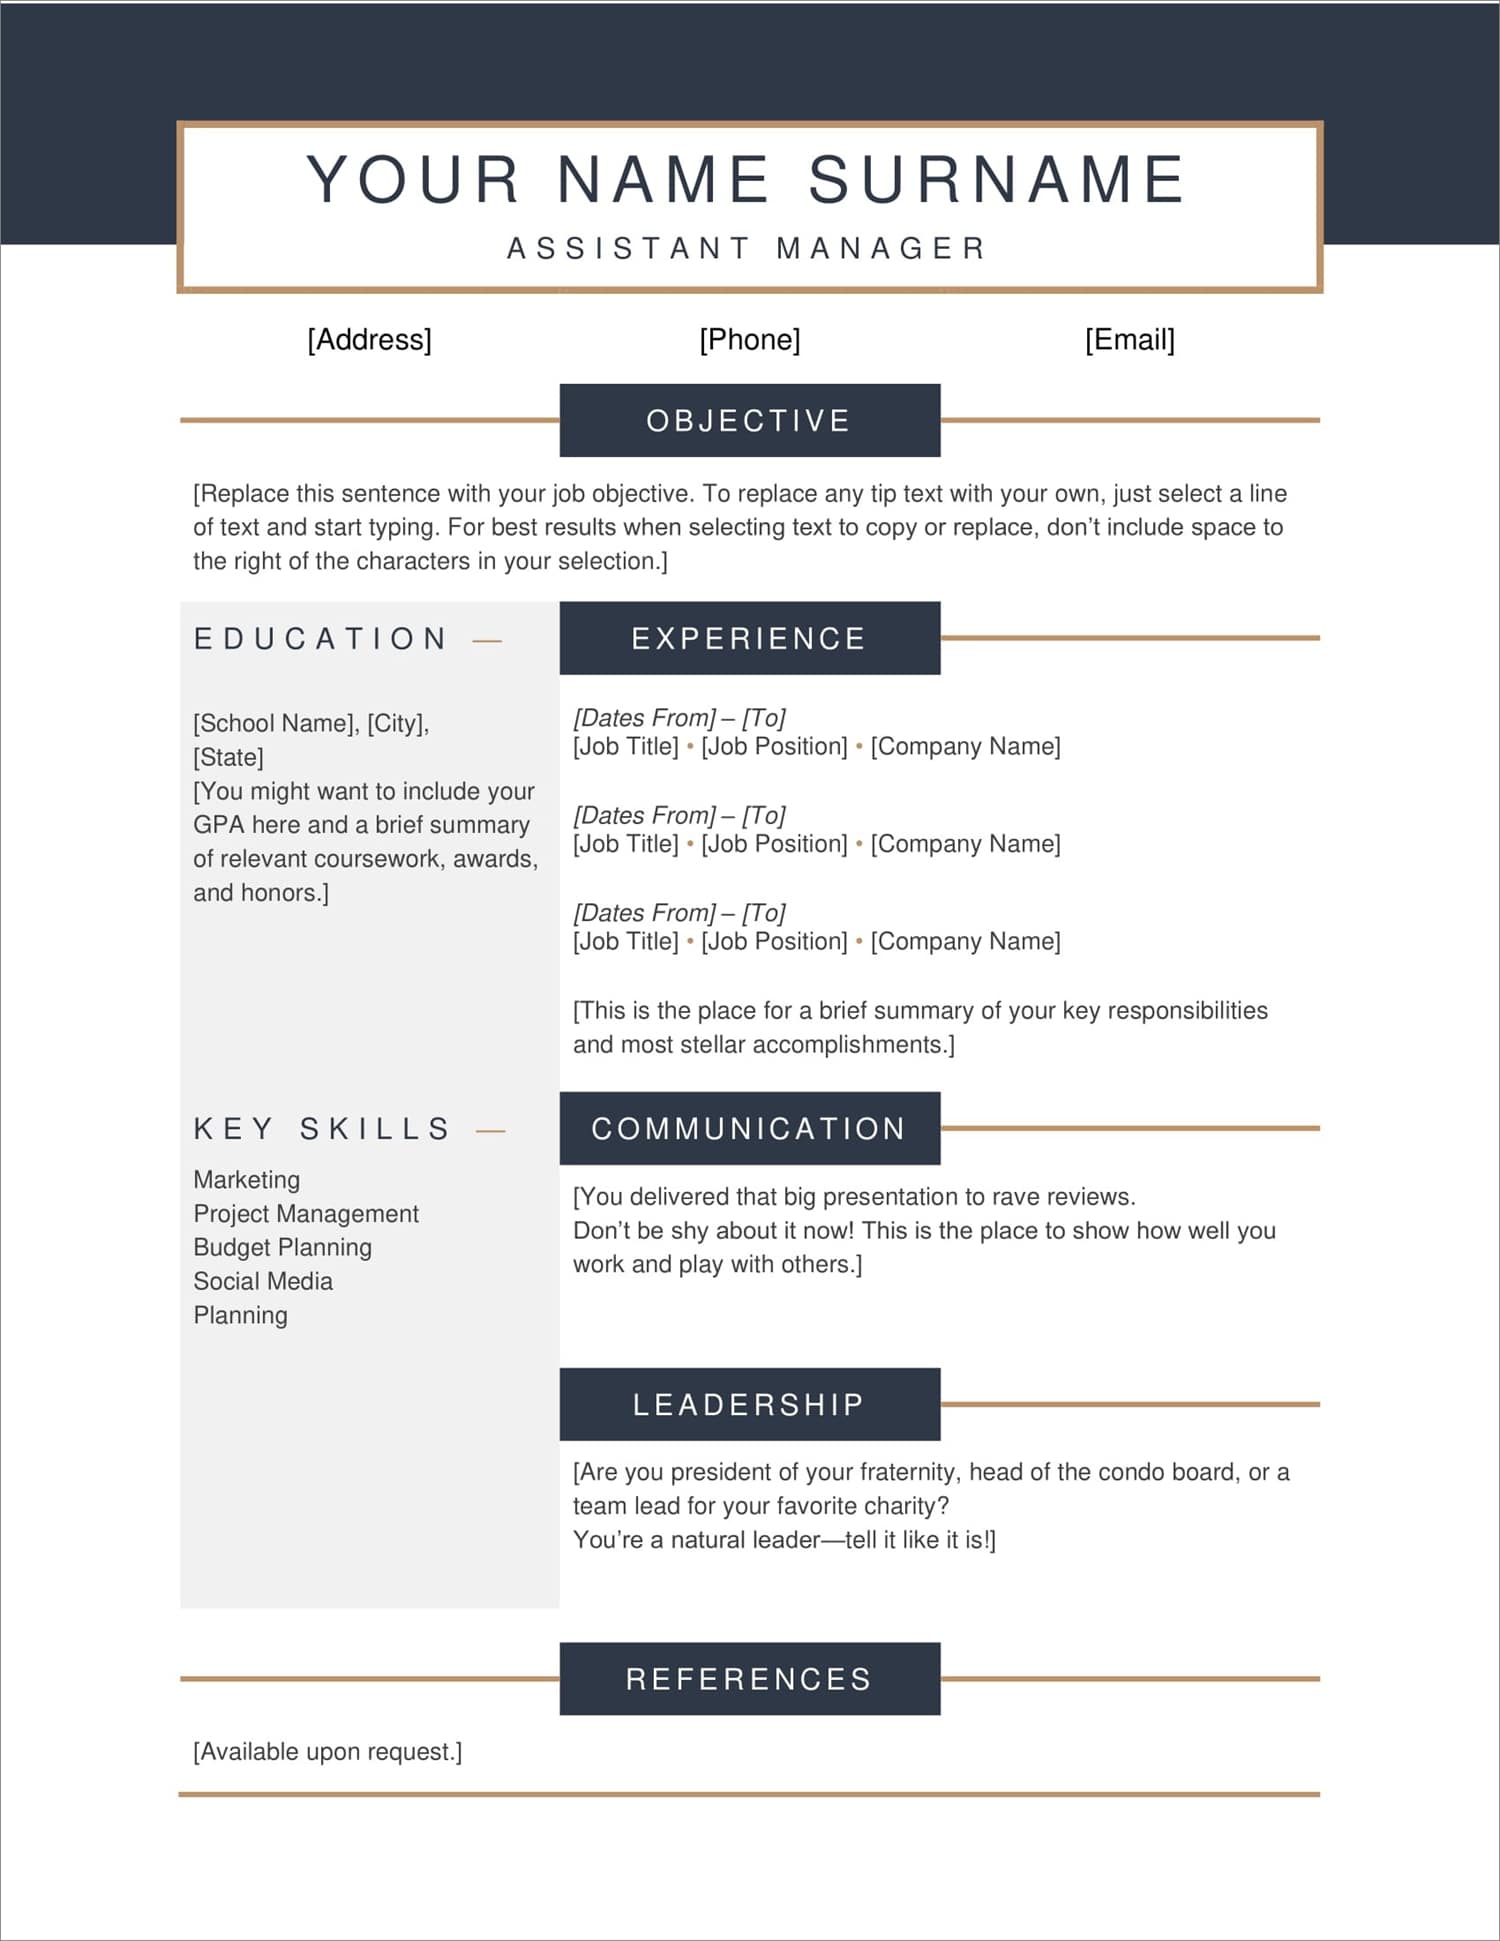 Blank Resume Format Free Download Resume Template References Riset